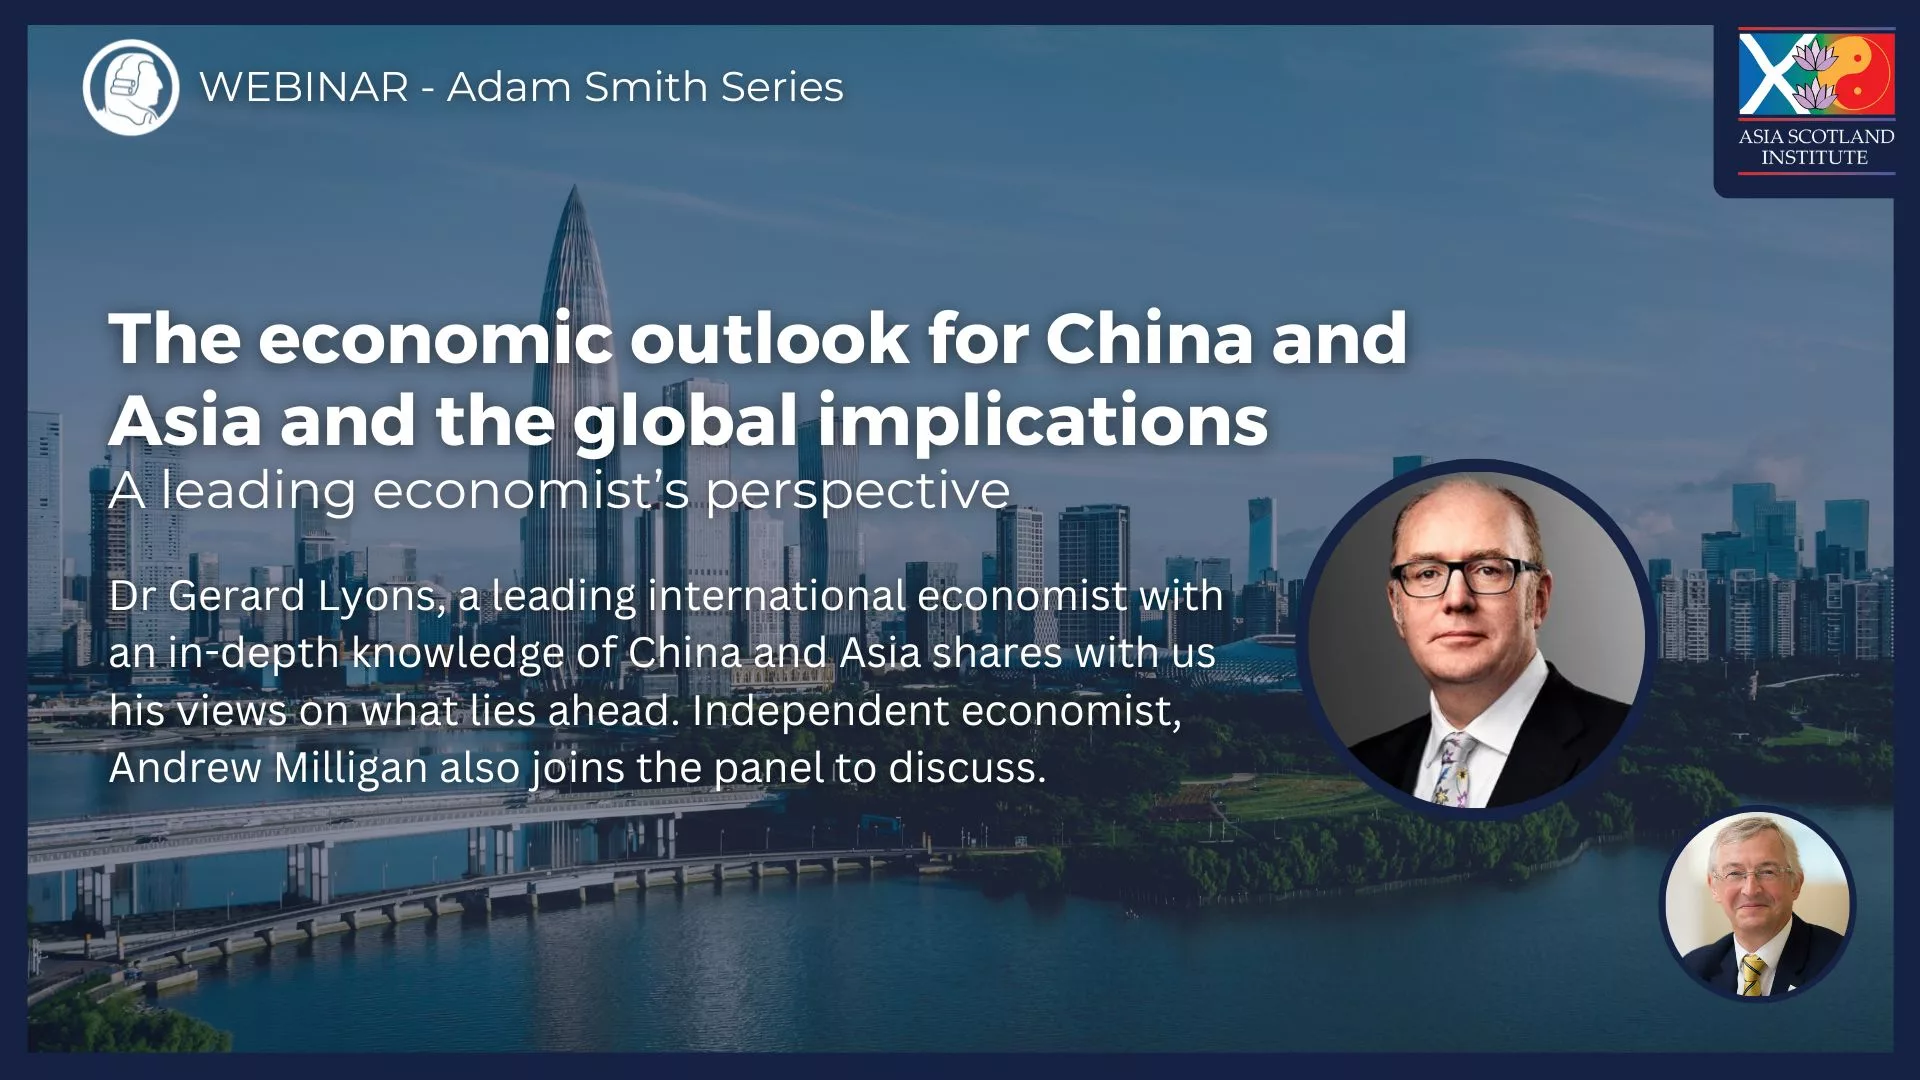 The economic outlook for China and Asia and the global implications 1920 x 1080 jpg